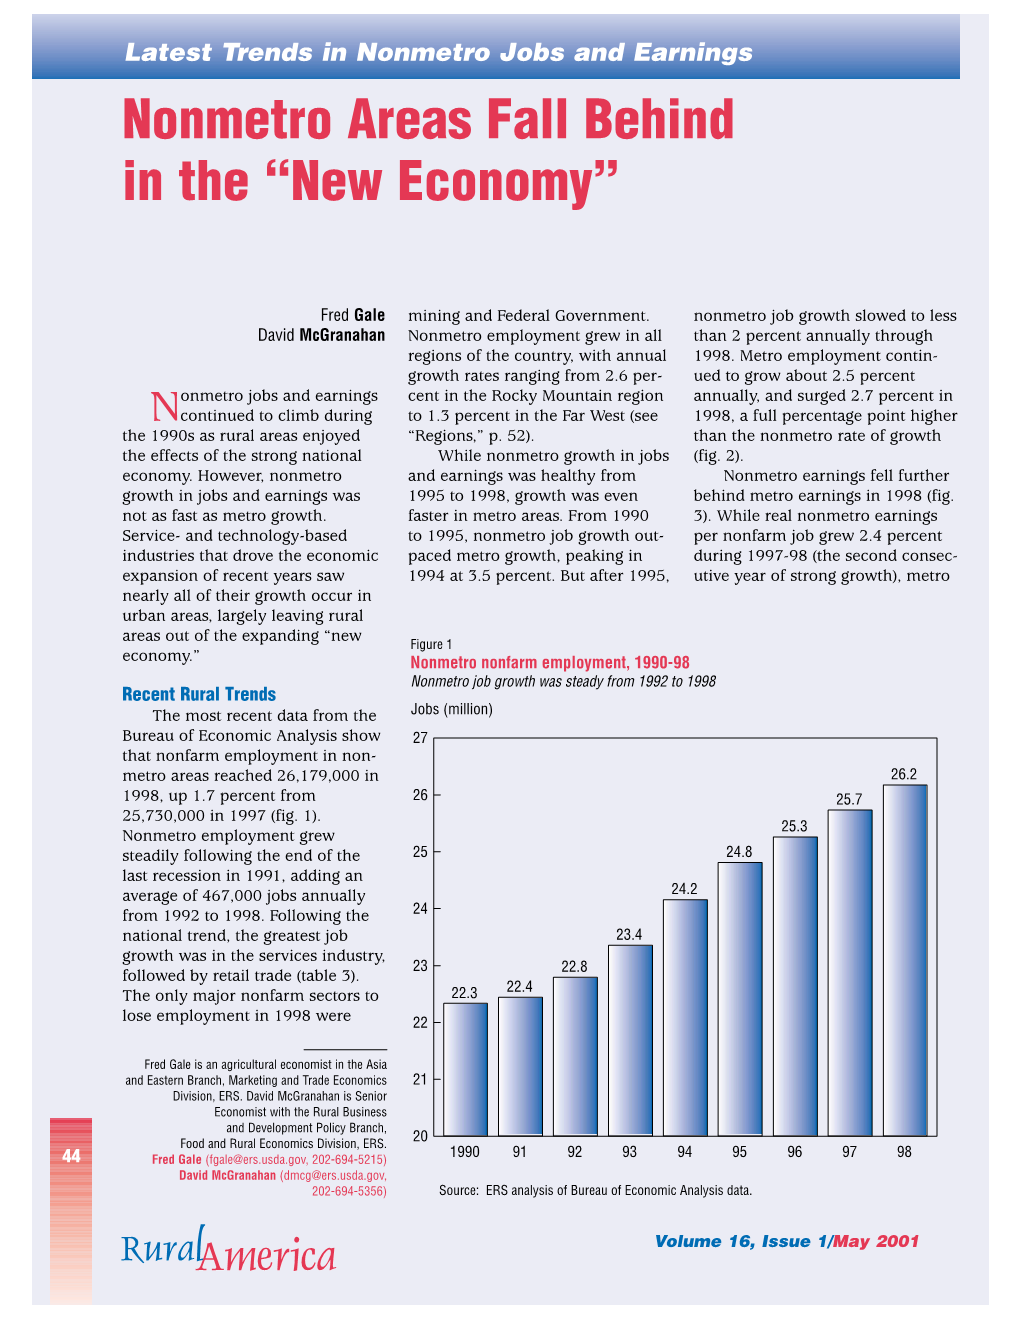 Nonmetro Areas Fall Behind in the “New Economy”